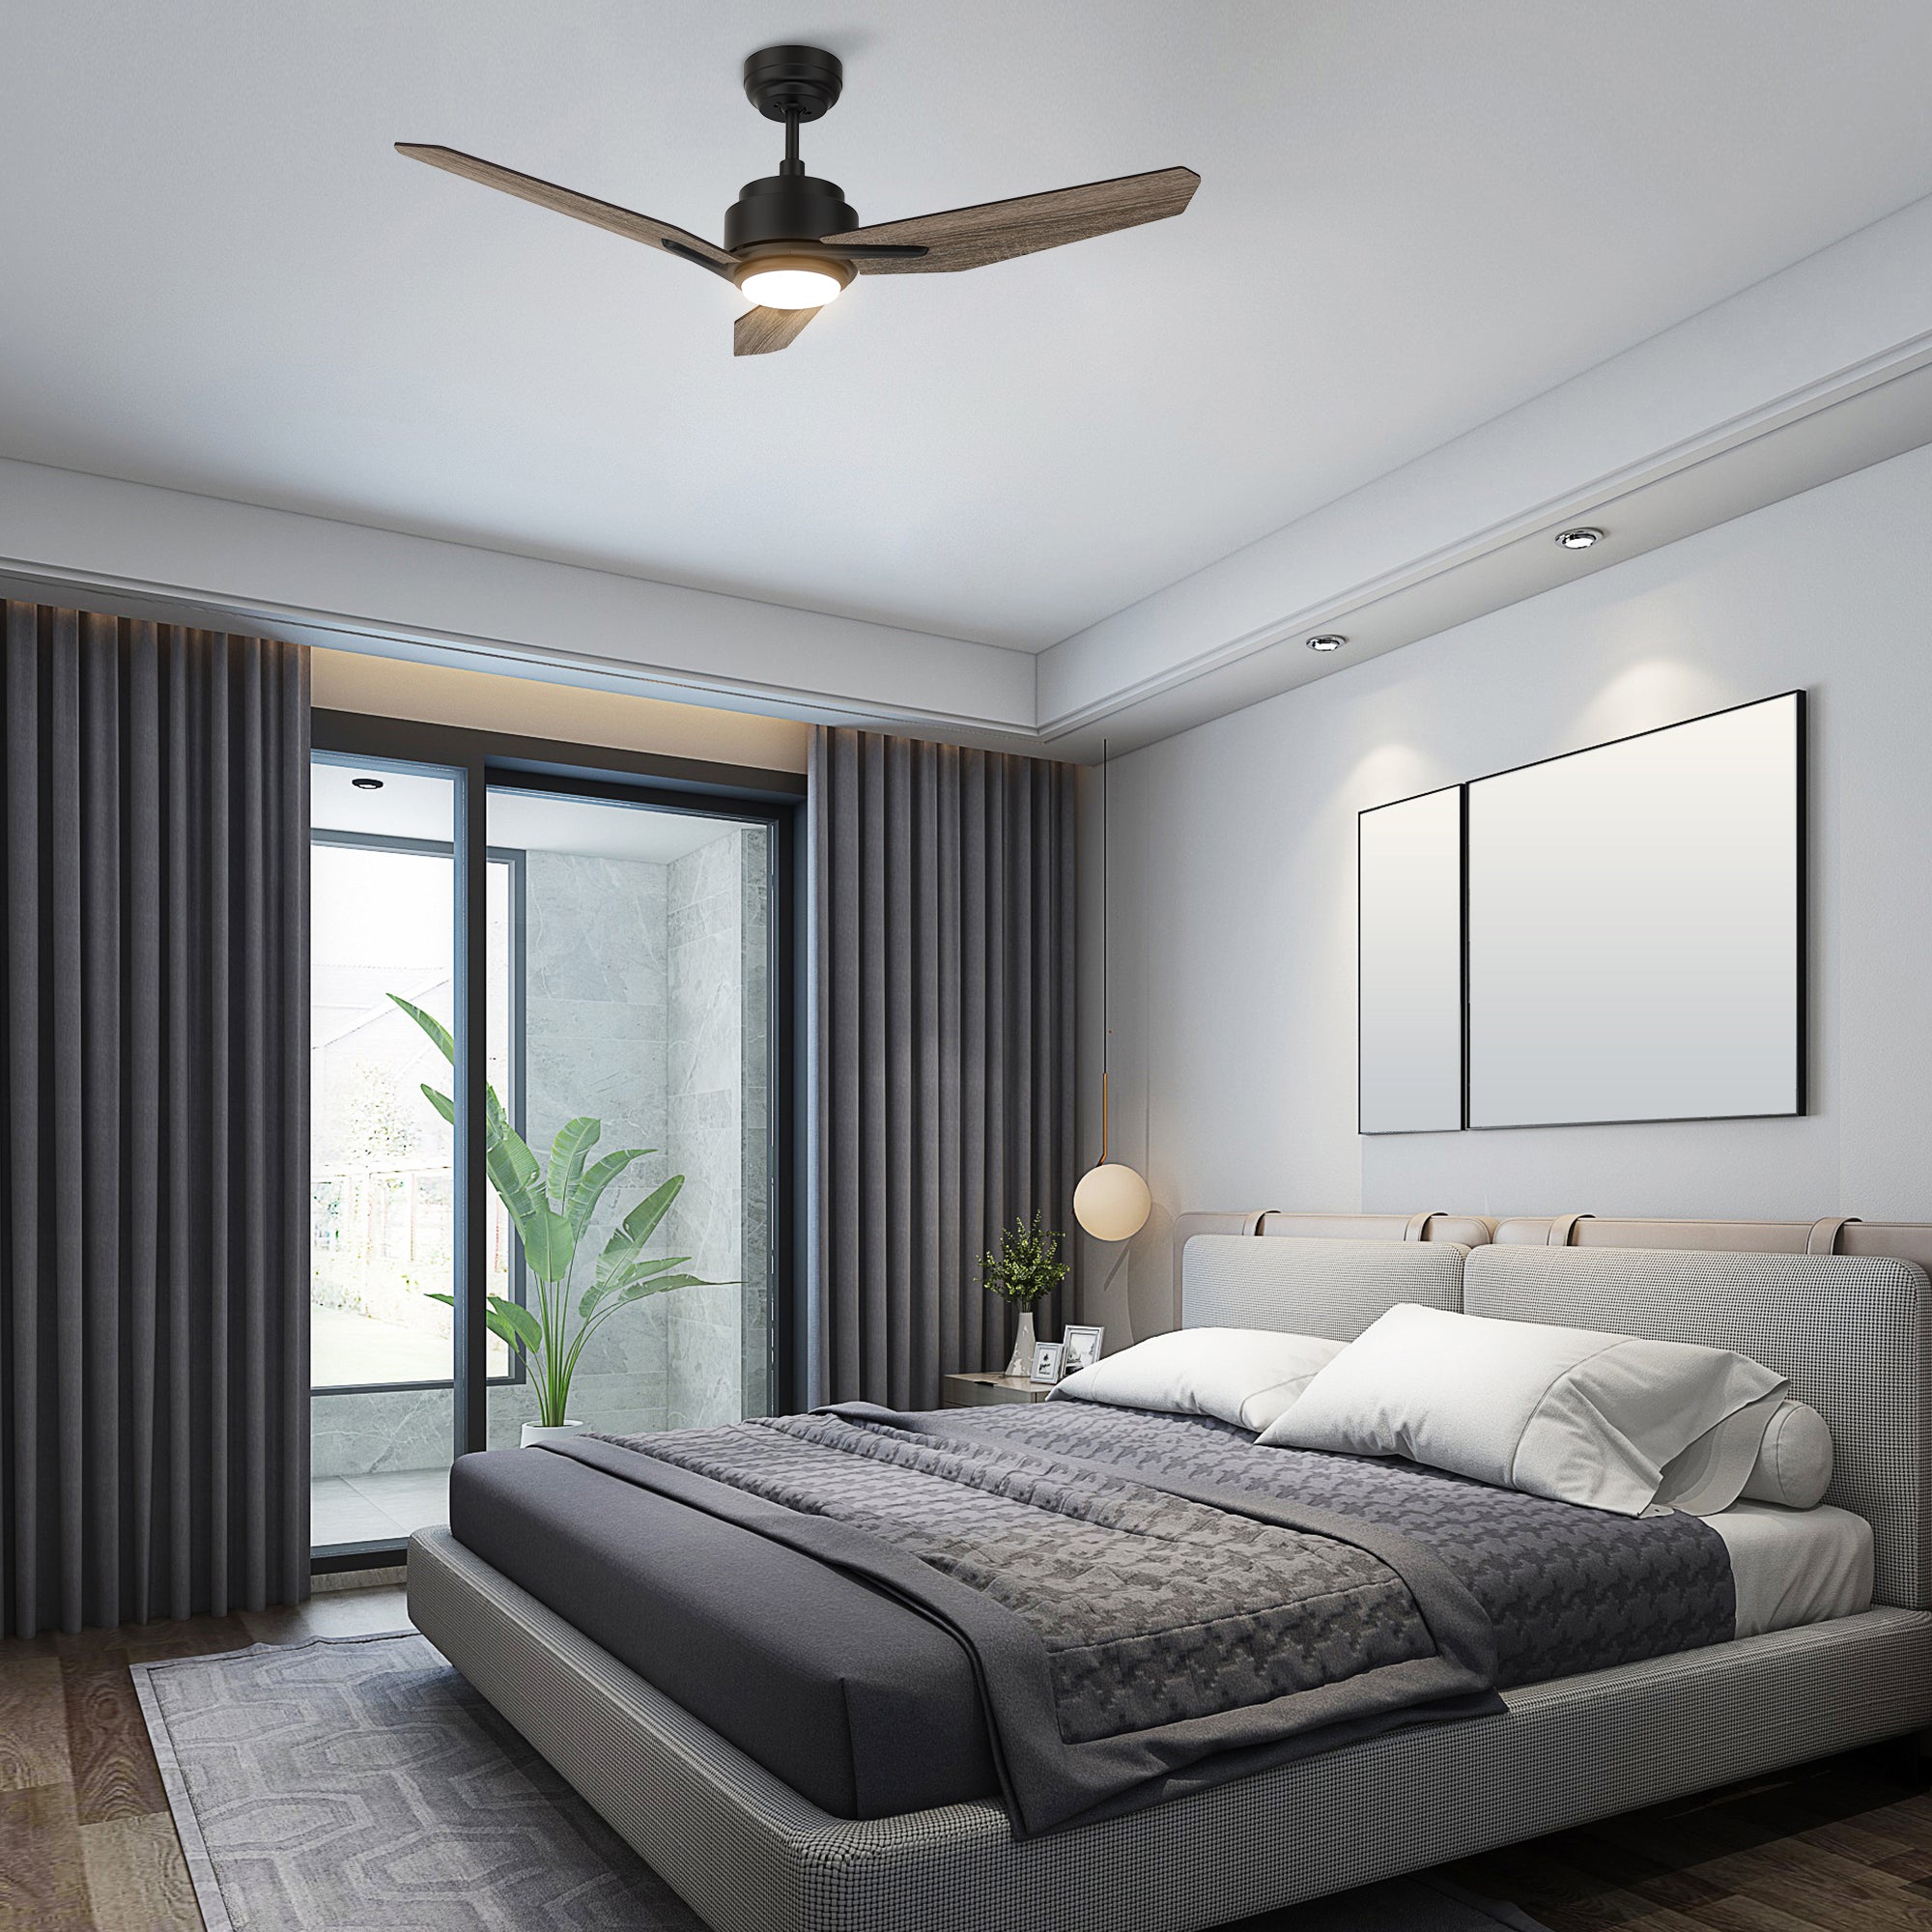 Smafan Tilbury 48&#39;&#39; smart ceiling fan fan features Remote control, Wi-Fi apps, Siri Shortcut and Voice control technology (compatible with Amazon Alexa and Google Home Assistant ) to set fan preferences.